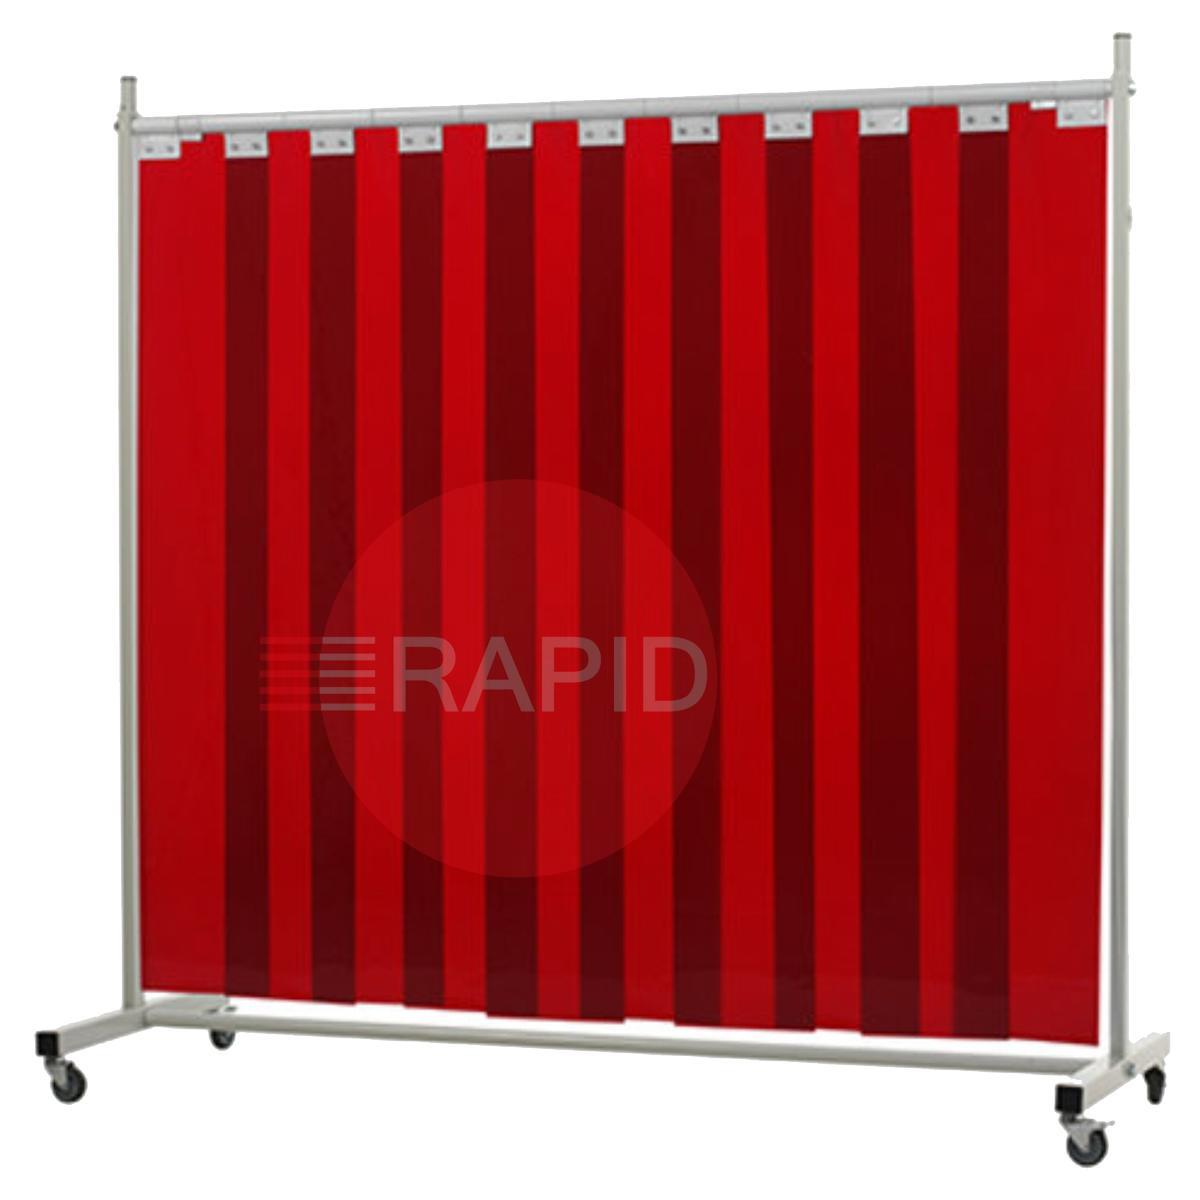 36.32.25  CEPRO Robusto Single Welding Screen with Orange-CE Strips - 2.2m Wide x 2.1m High, Approved EN 25980